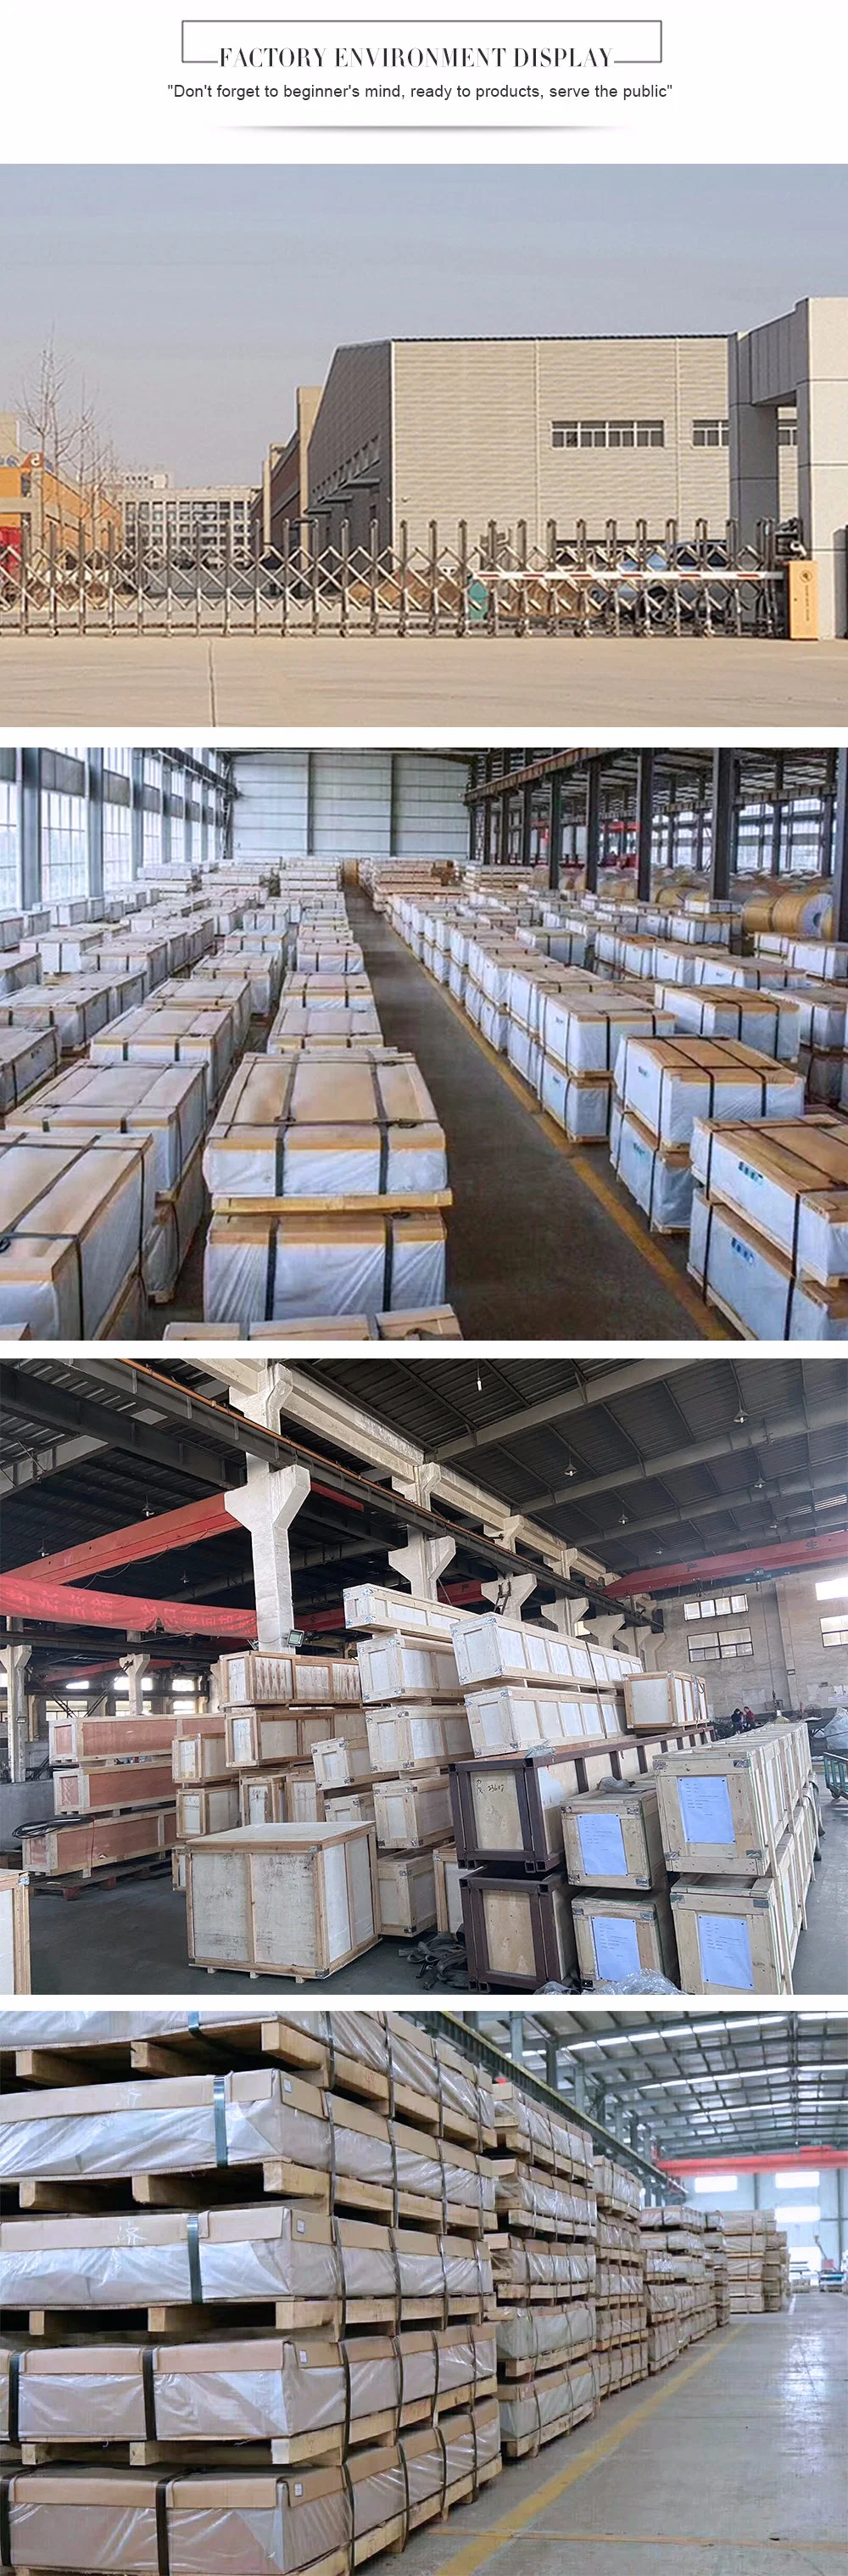 ASTM 201 304 304L 316 316L 321 S32205 S32750 Cold Drawn Stainless Seamless Steel Tube